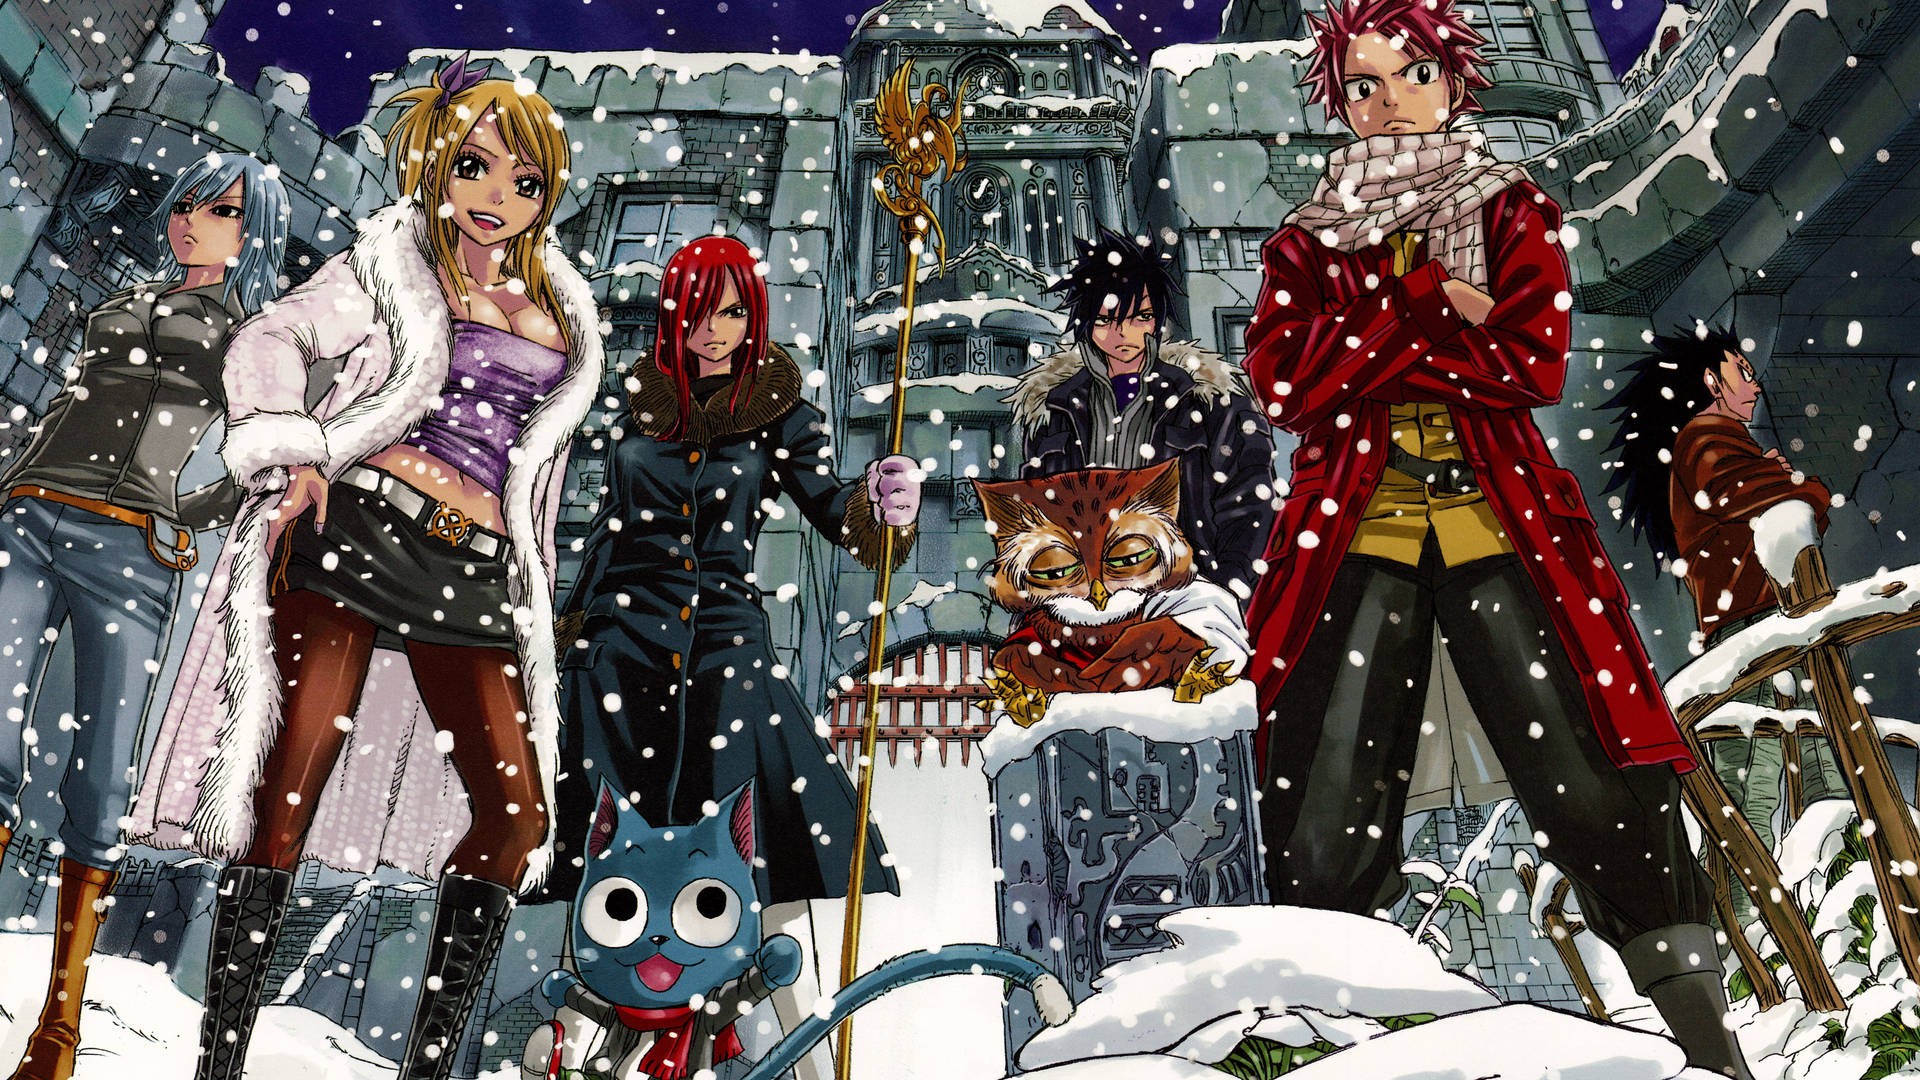 Fairy Tail Characters Winter Scene